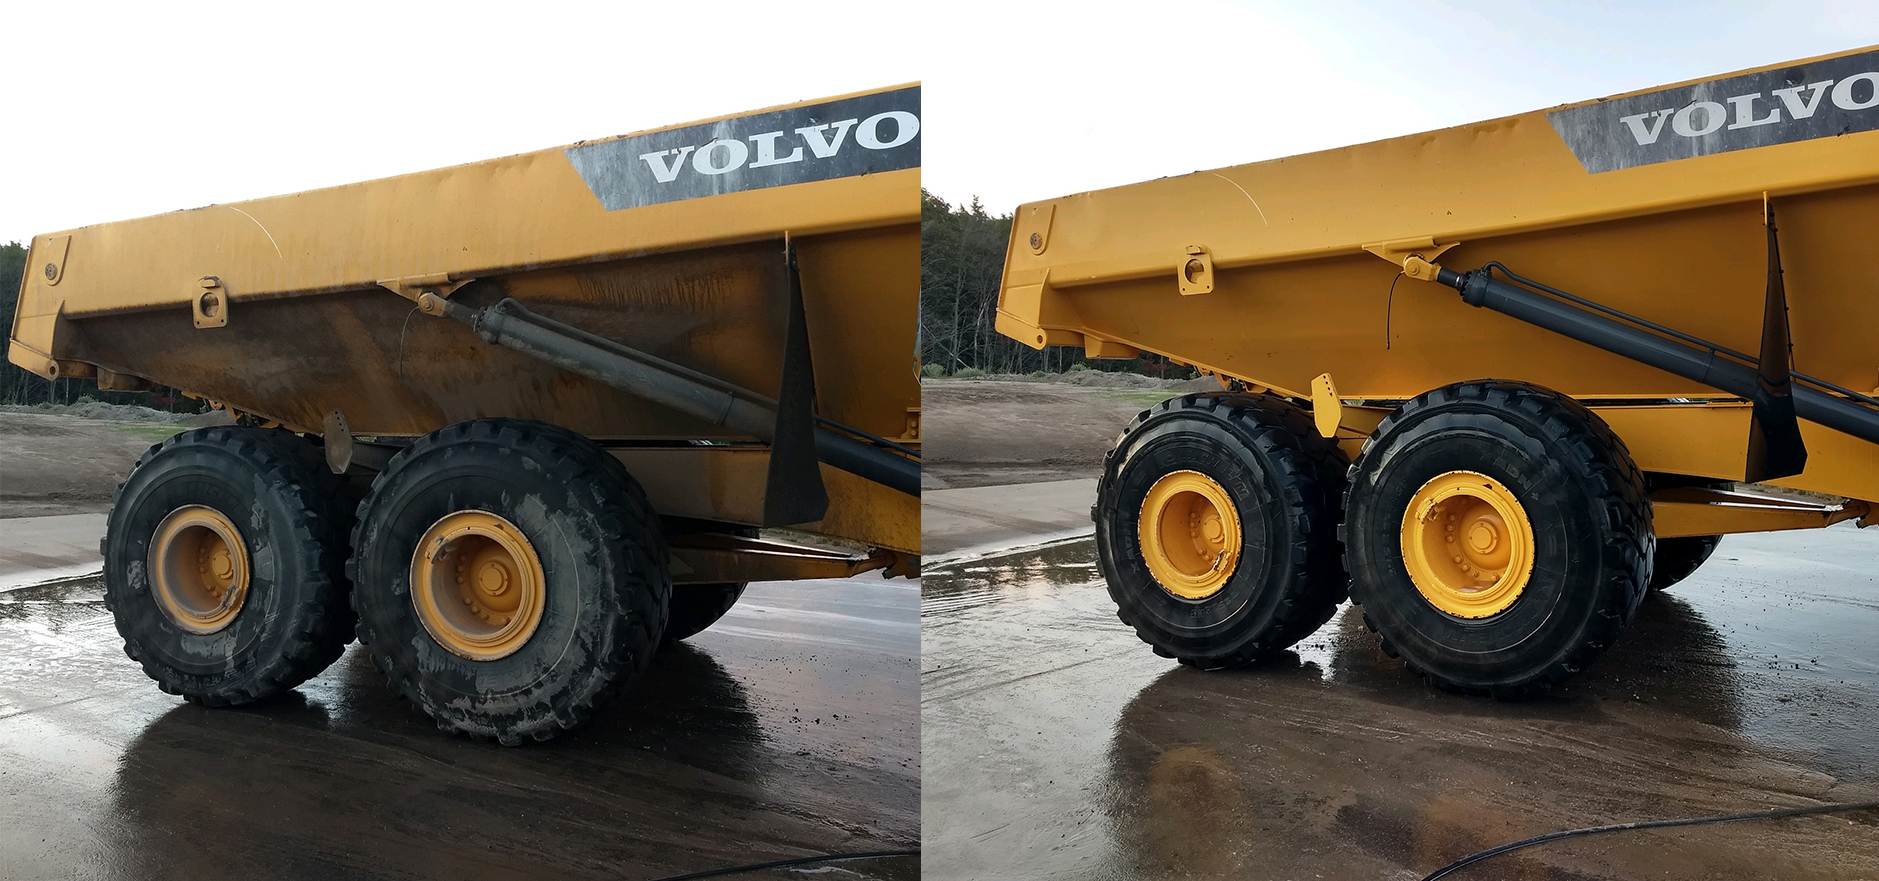 Construction Equipment Before & After Image Using Uppercut a Polish Safe Truck Wash Acid Soap